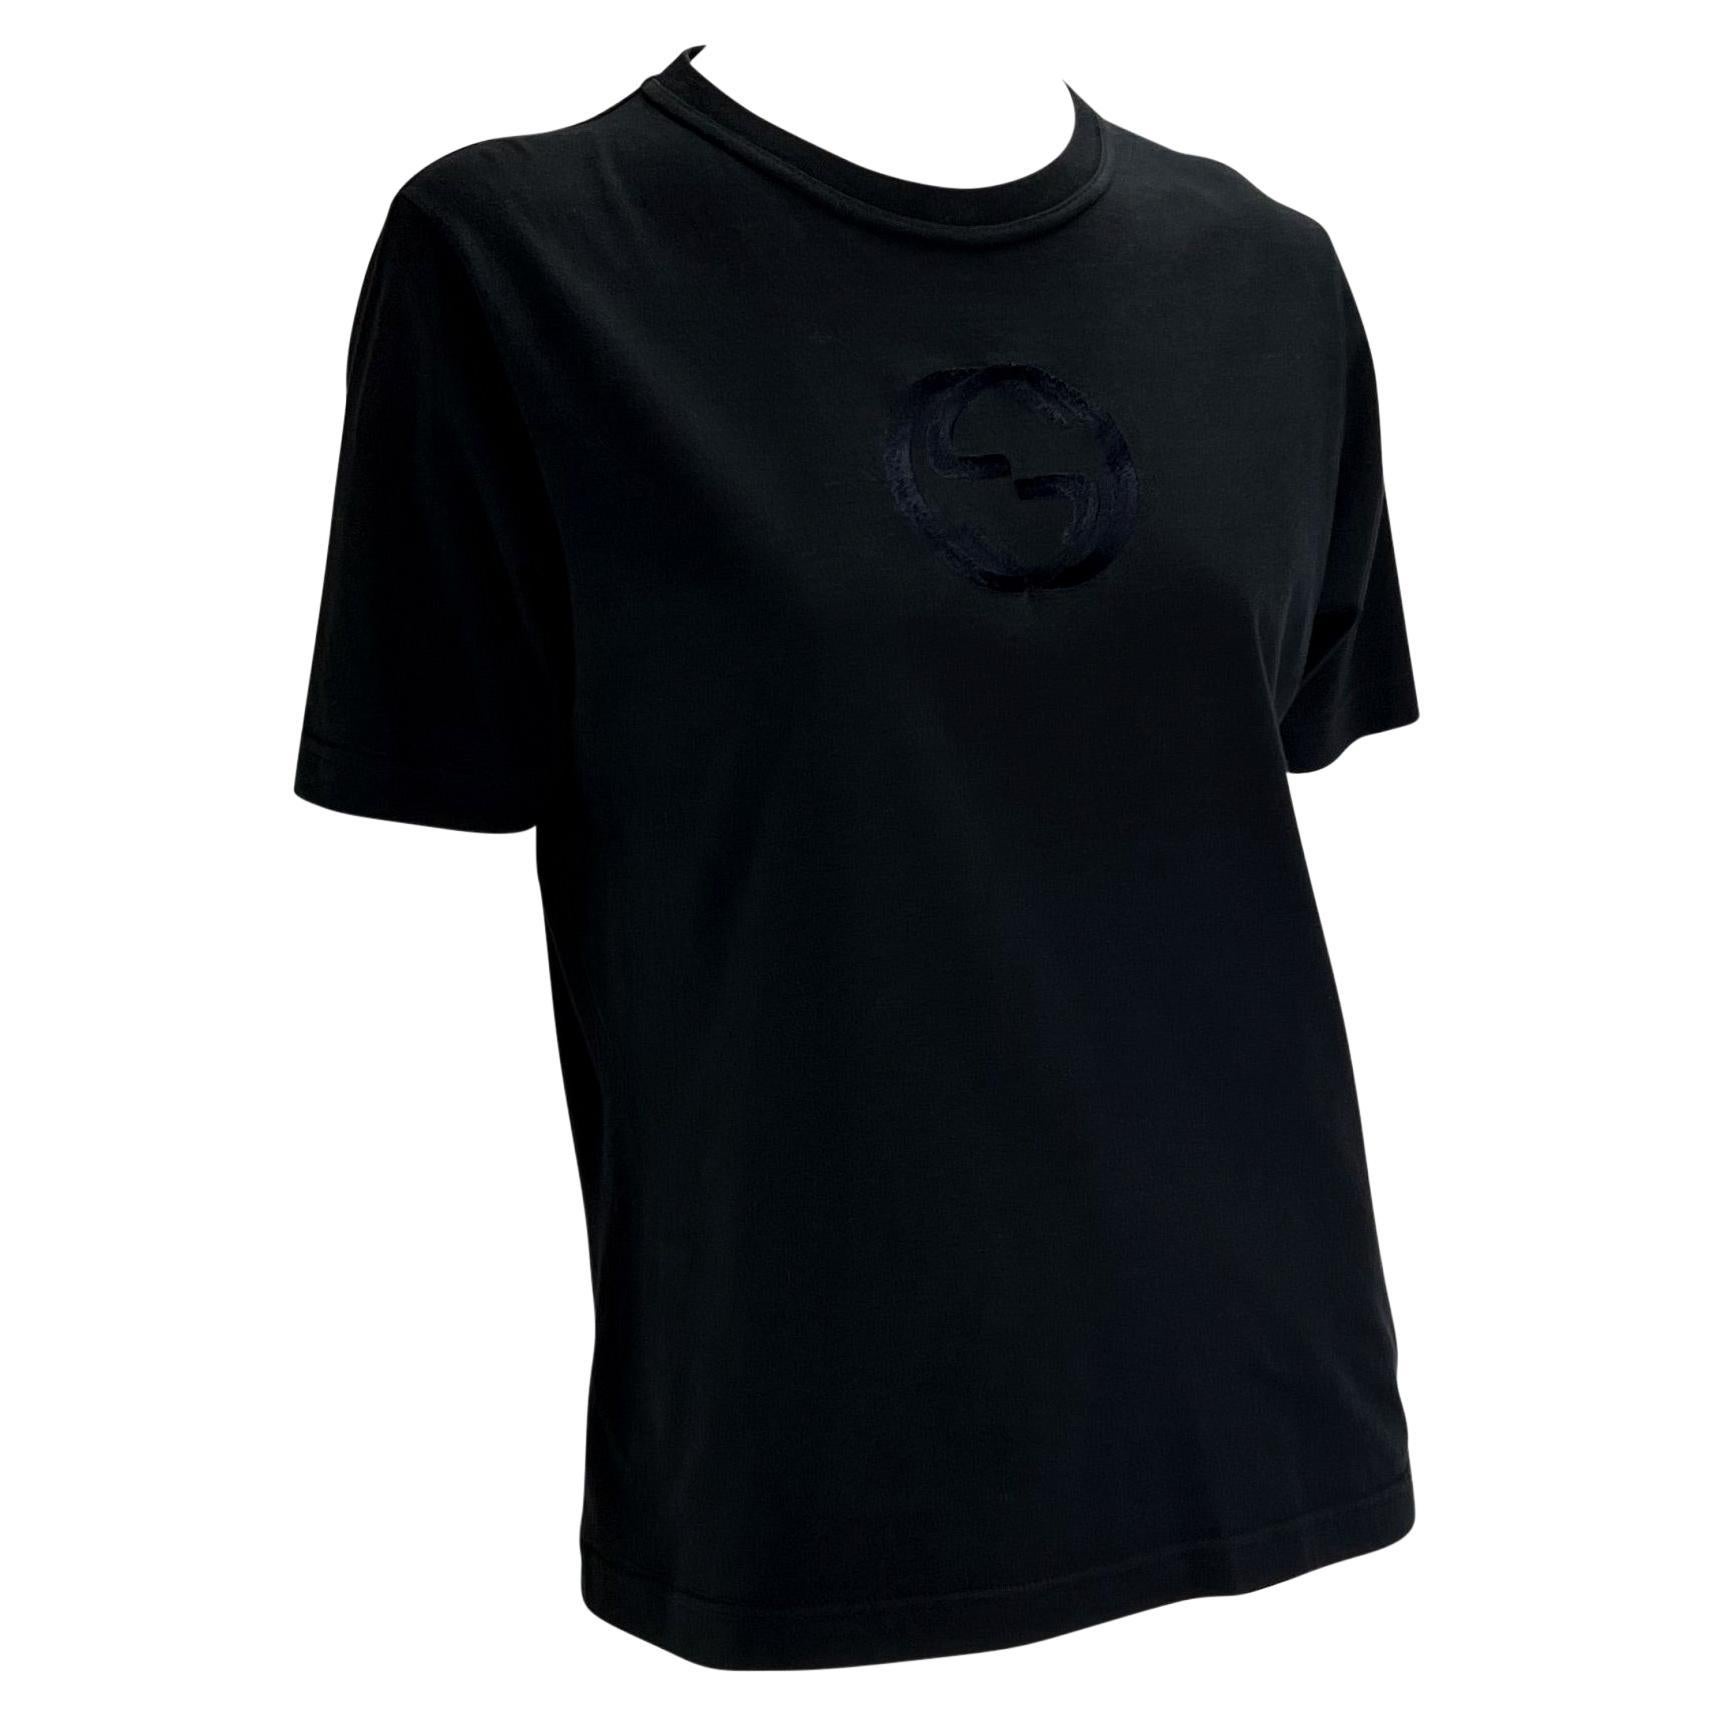 Women's or Men's S/S 1997 Gucci by Tom Ford Black 'GG' Logo Embroidered Cotton T-Shirt  For Sale